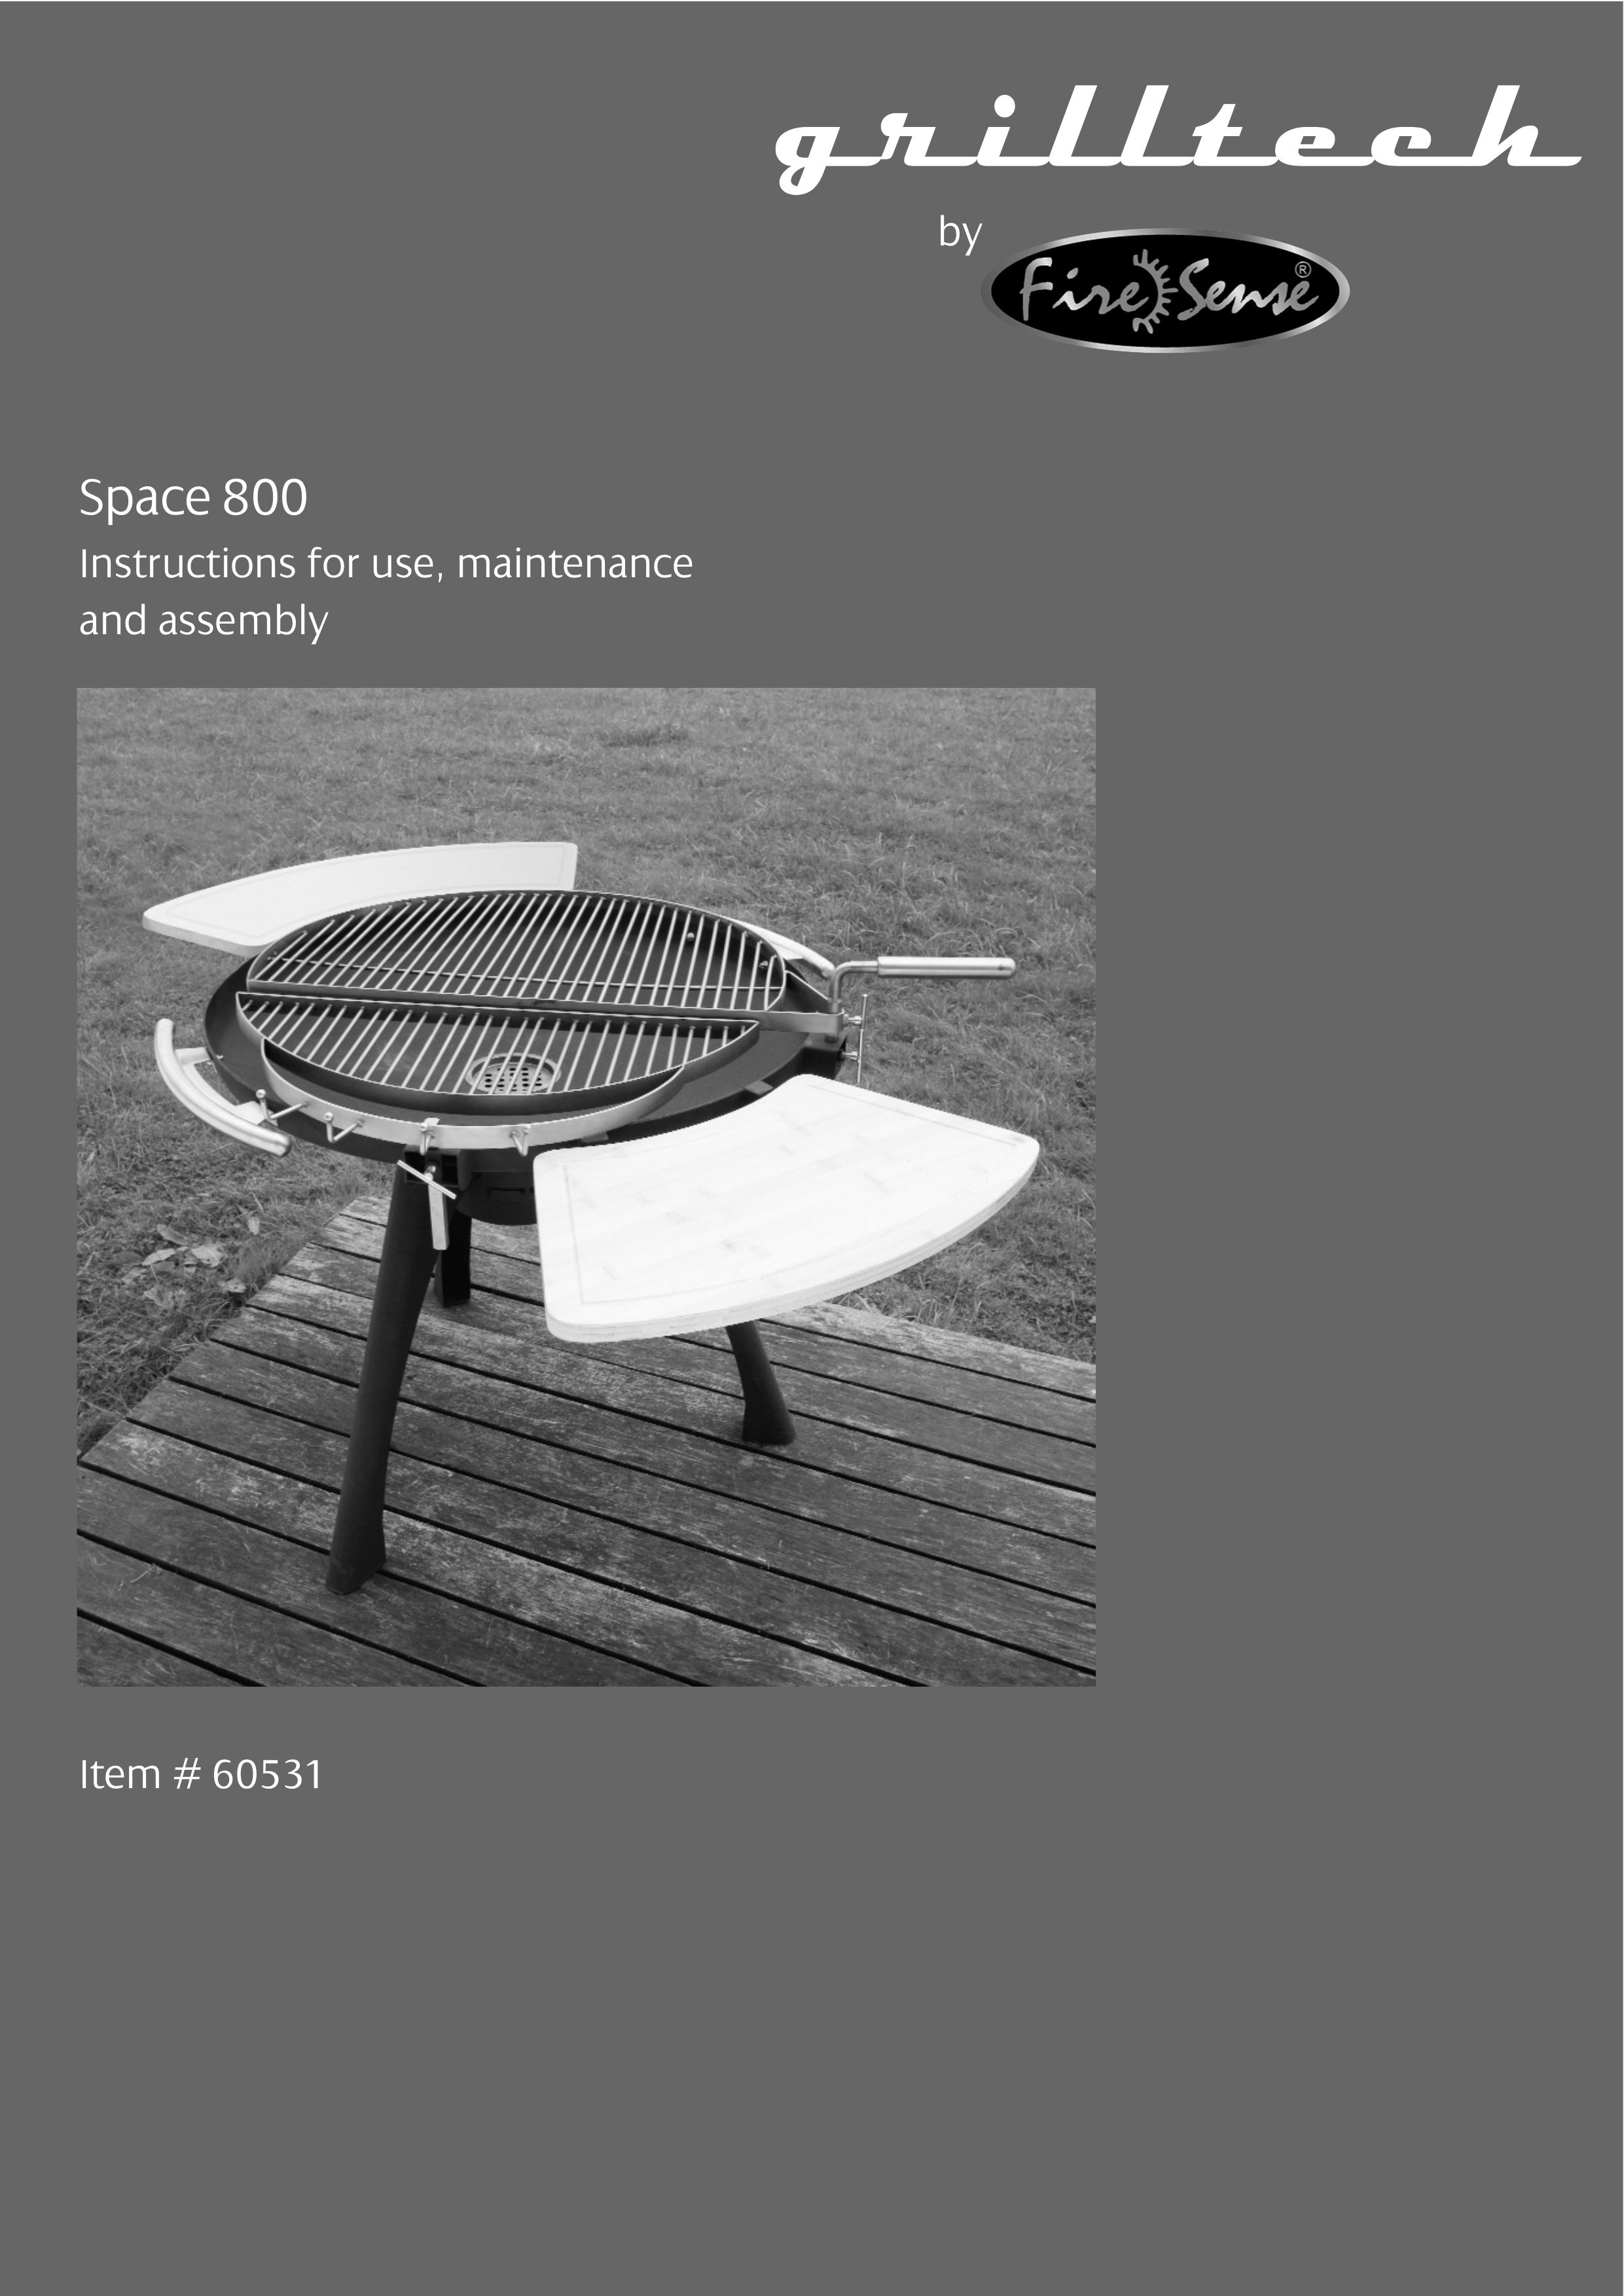 Well Traveled Living Space 800 Charcoal Grill User Manual